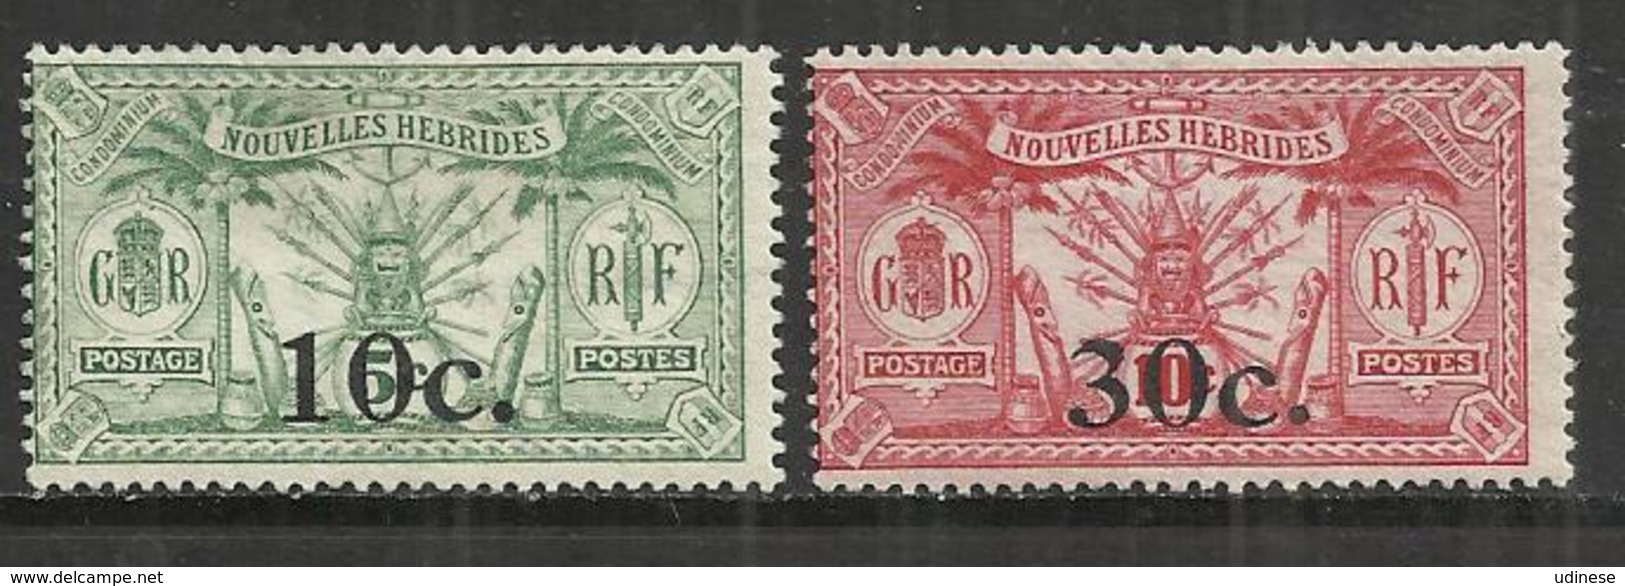 NOUVELLE HEBRIDES 1920 - INDIGENOUS IDOL - OVERPRINTED -  LOT OF 2 DIFFERENT - MNH NEUF MINT NUEVO - Neufs